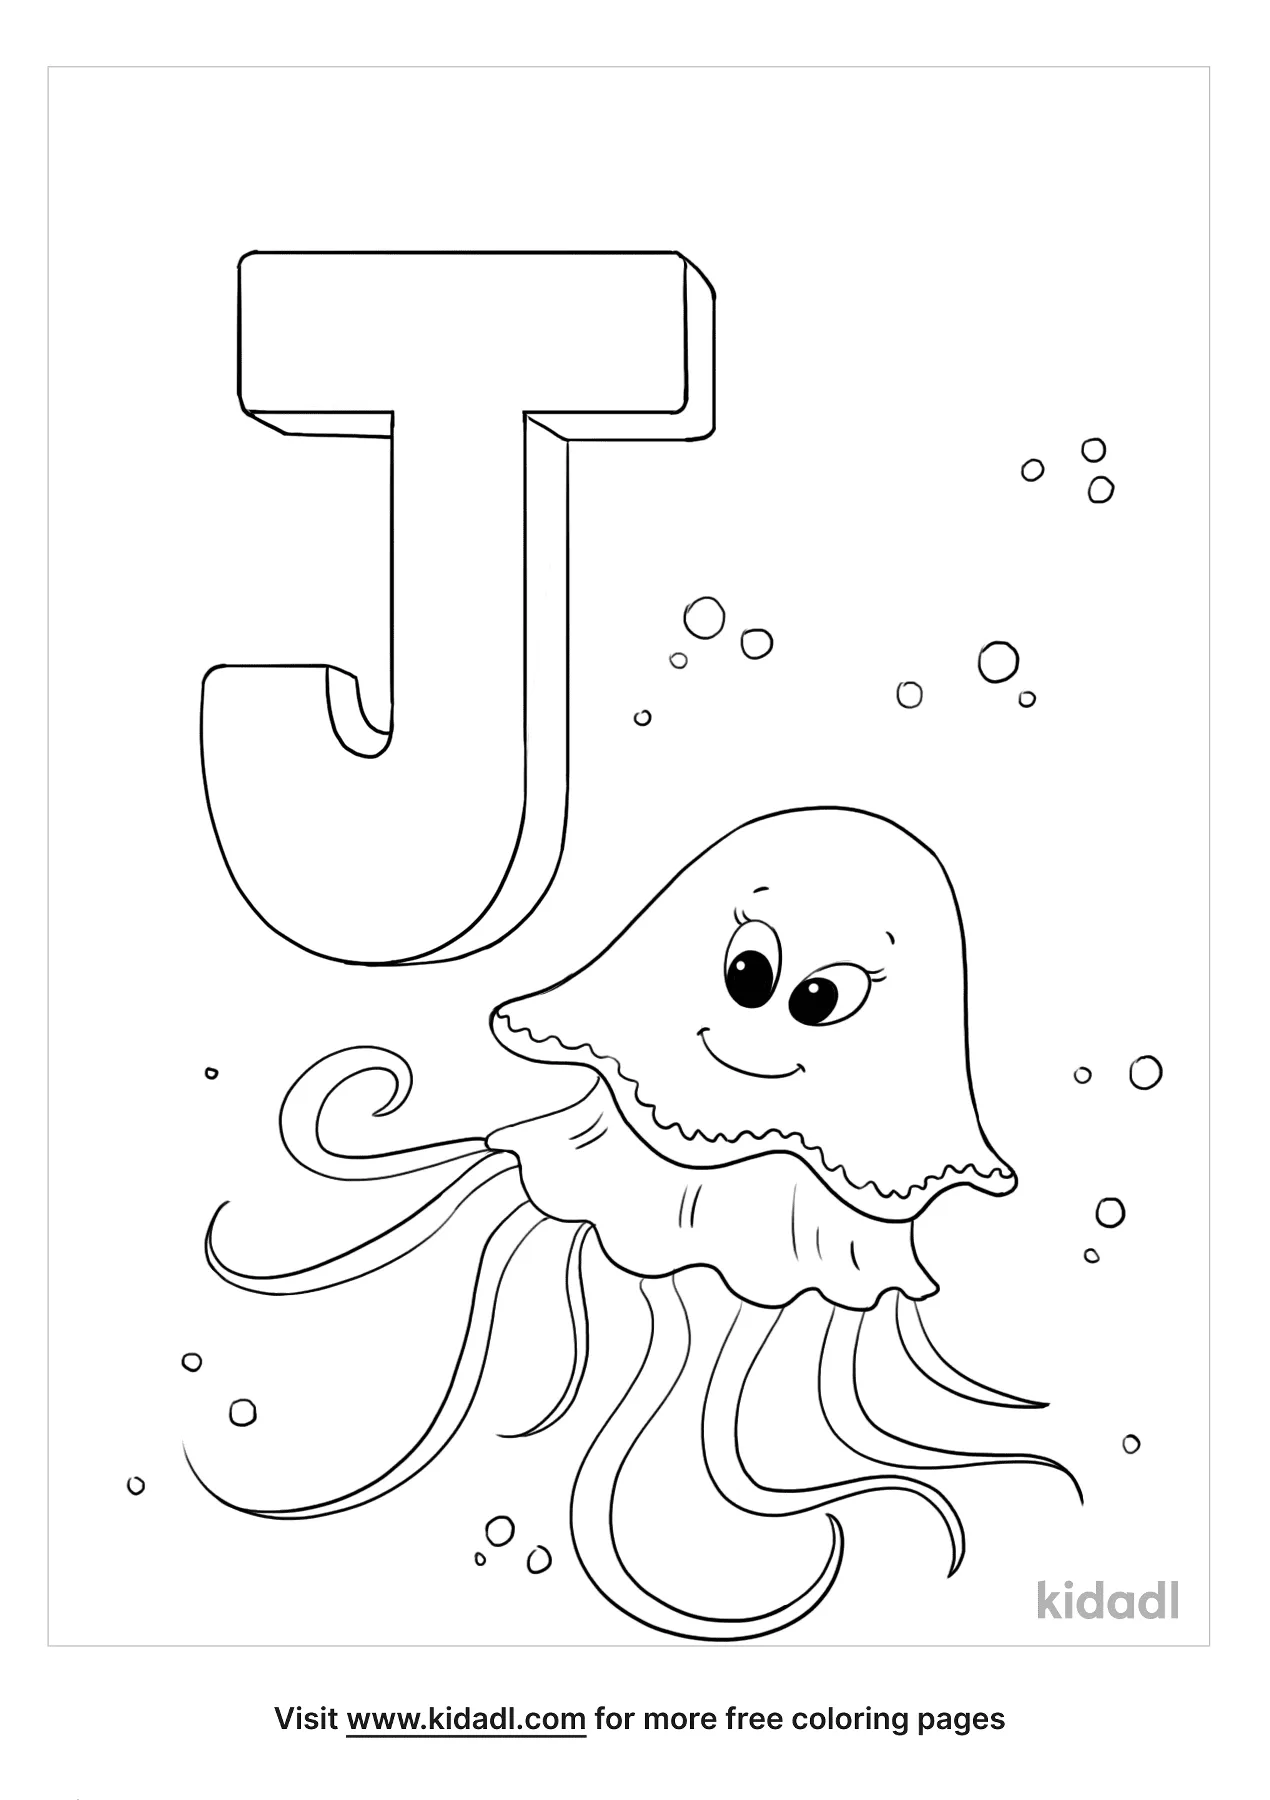 letter j coloring pages free letters coloring pages kidadl